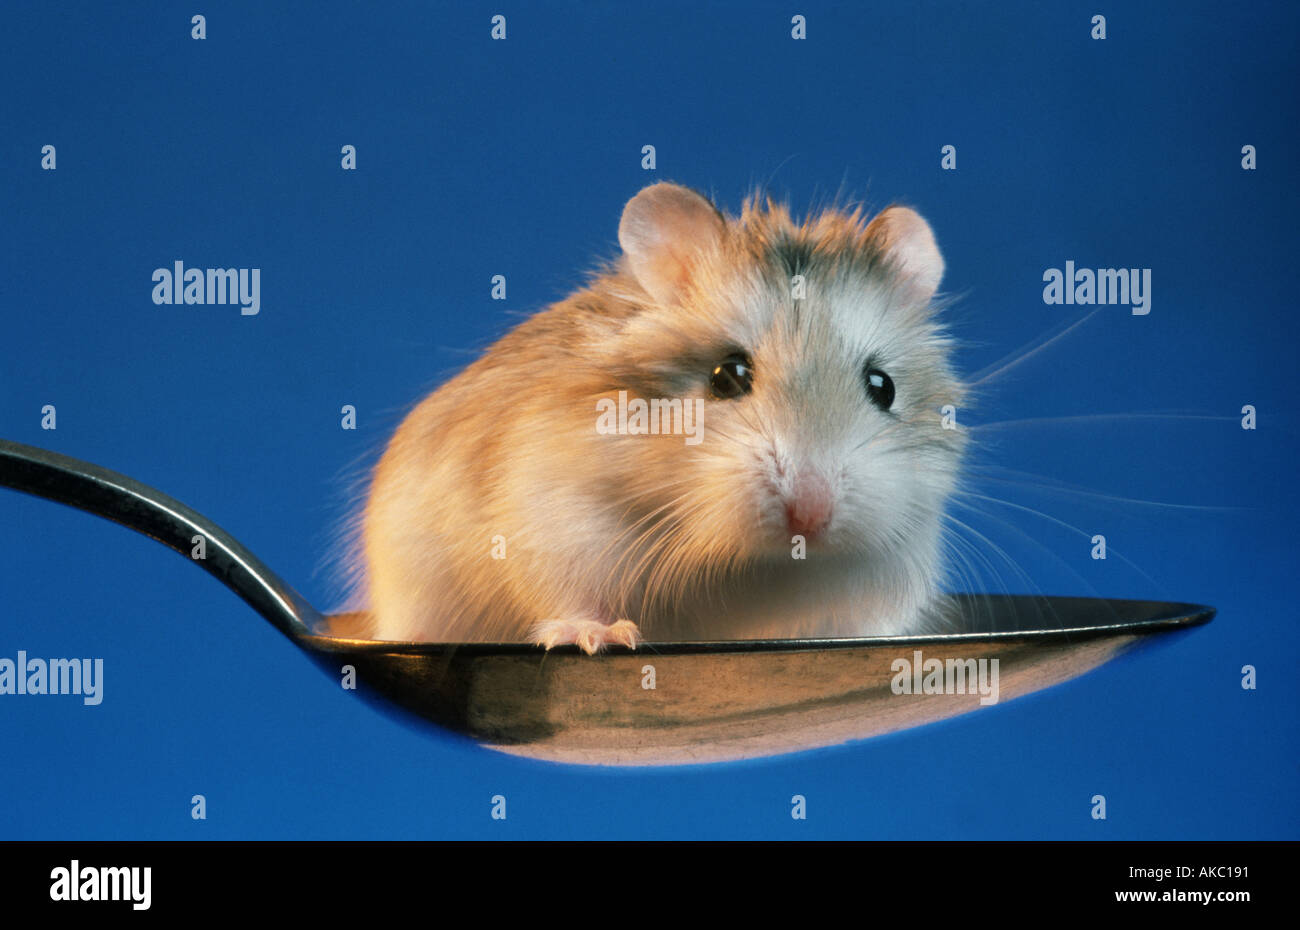 Roborowsky Hamster sitting in a spoon Stock Photo